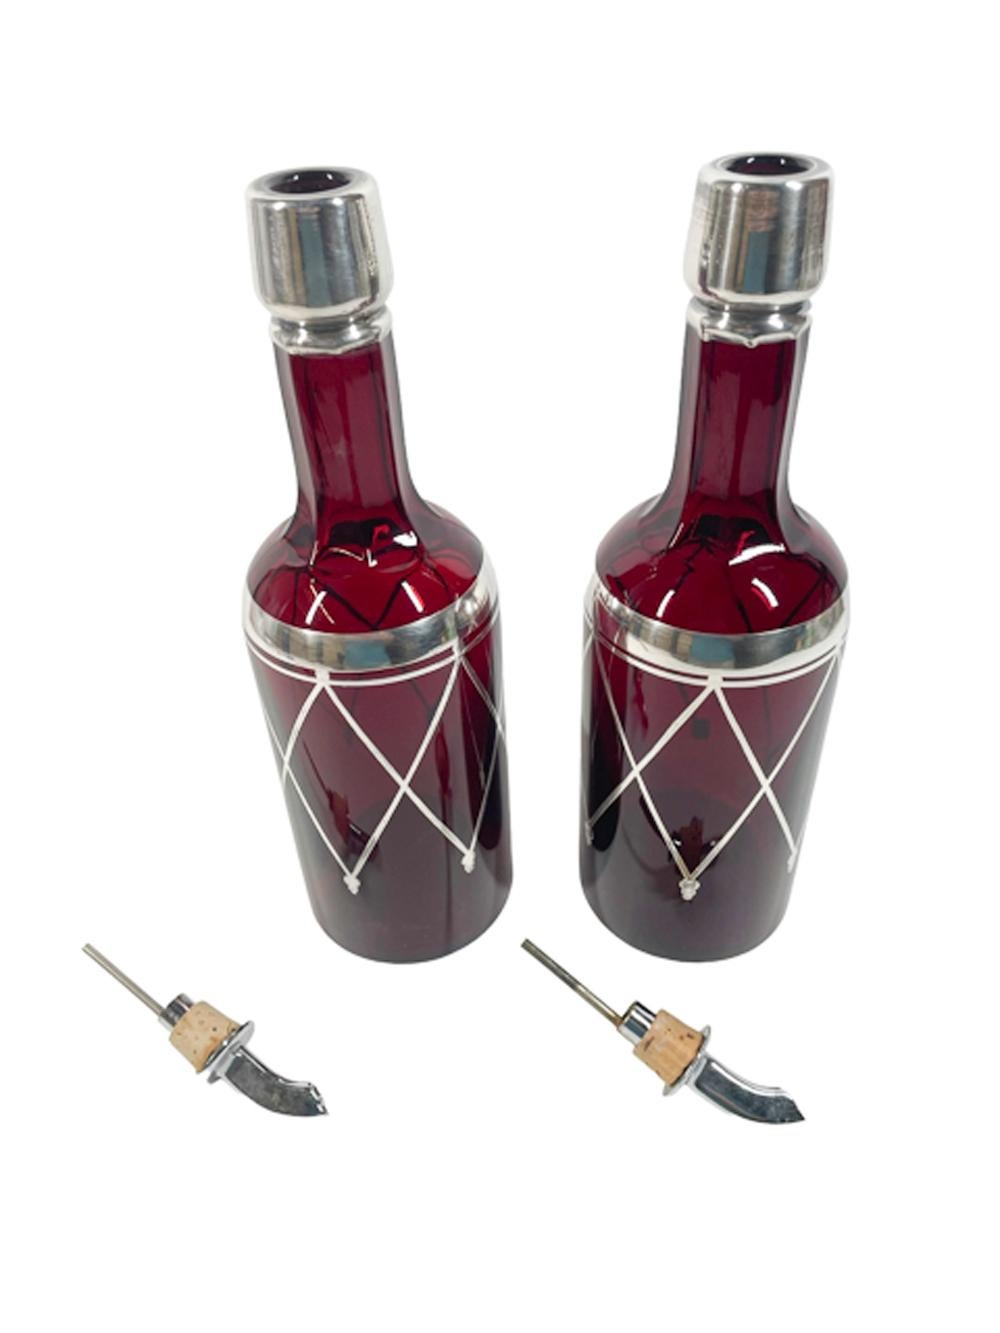 Pair of Art Deco back bar bottles or decanters in silver overlaid ruby red glass with panel faceted necks. Silvered on the collar and with bands below the shoulder with crisscrossed lines terminating with trefoil pendants. Fitted with Chrome